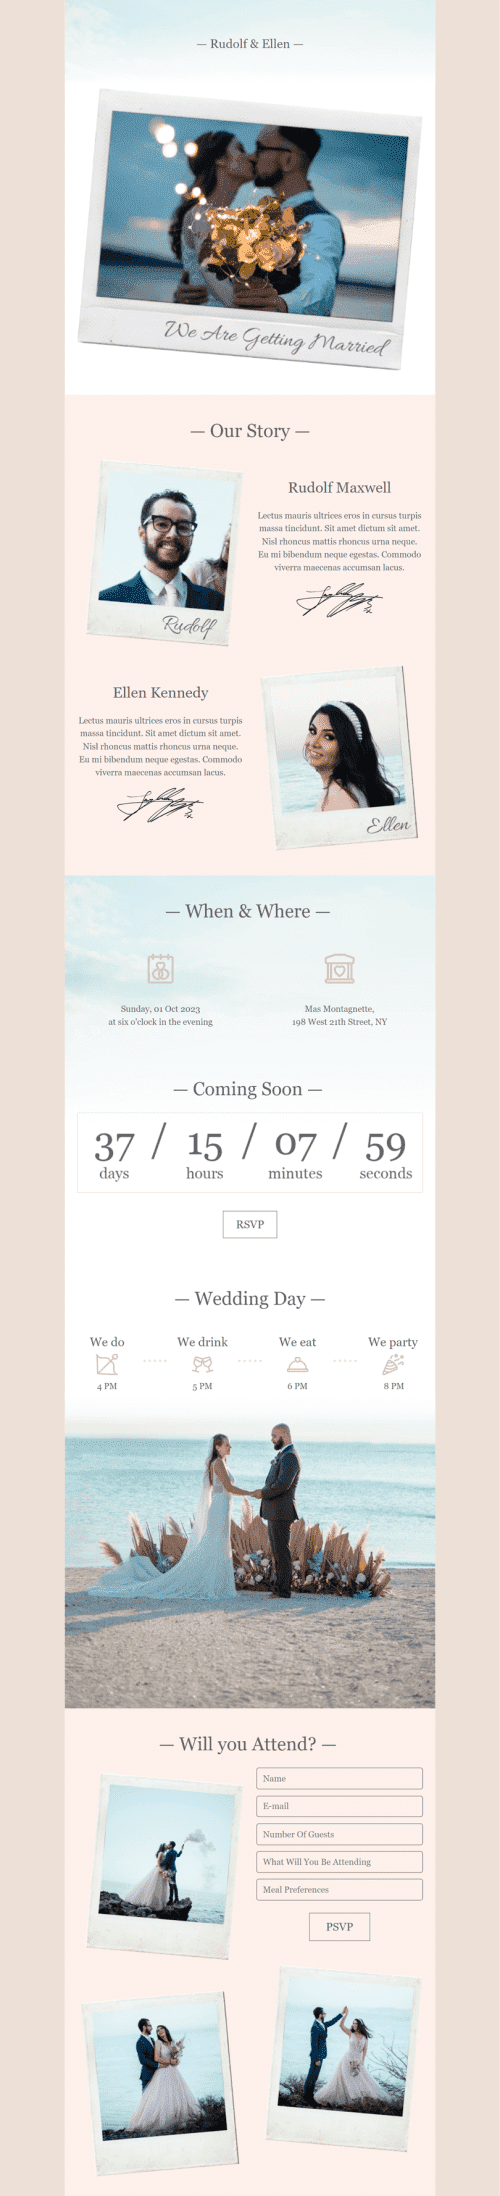 Wedding Invitation Email Template "We are getting married" for Photographer industry desktop view